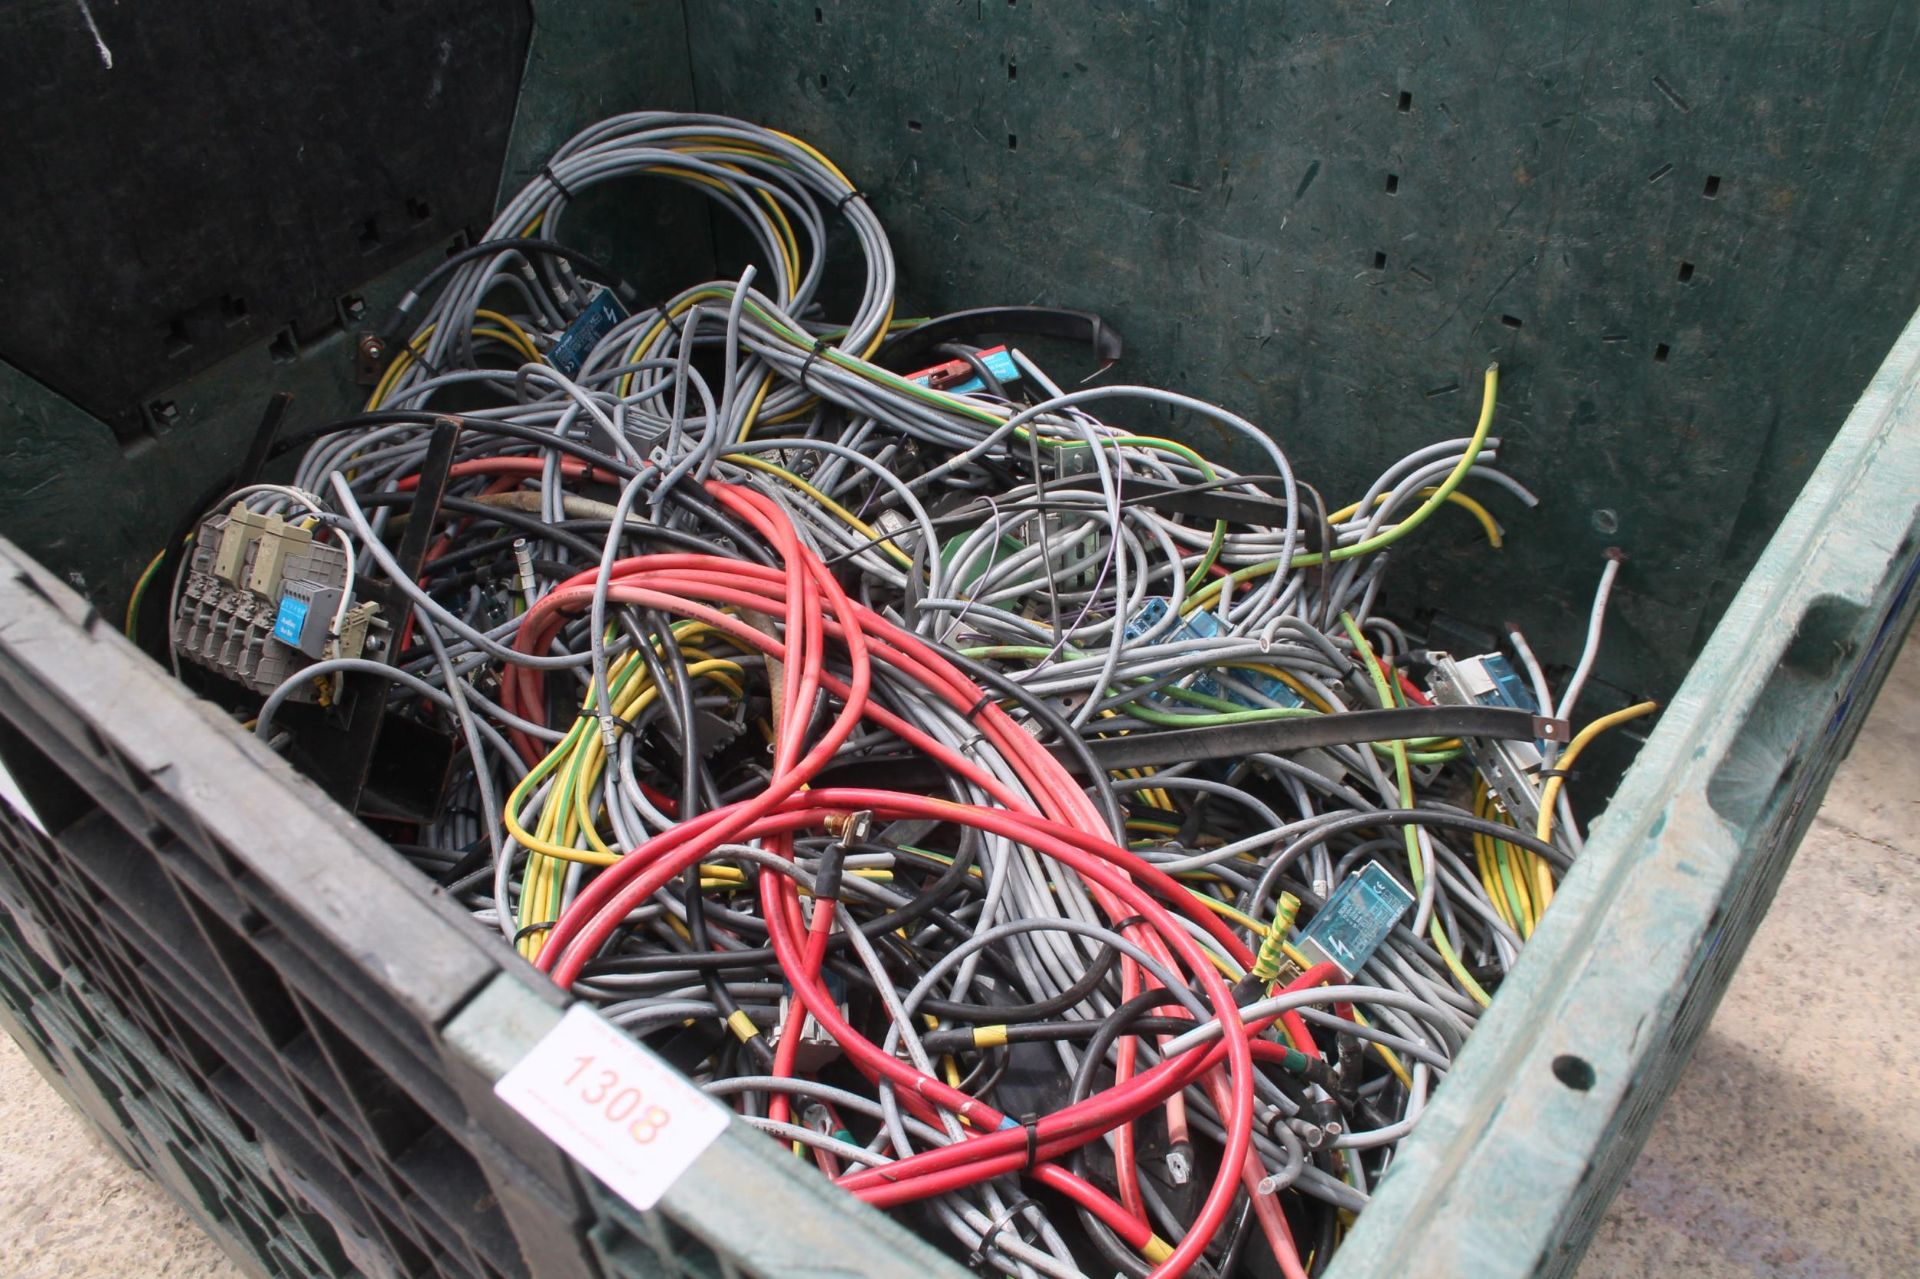 LARGE QUANTITY OF COPPER CABLE, FLEXIBLE BUSBARS, BRASS SWITCH GEAR. APPROX 150 kg (content weight